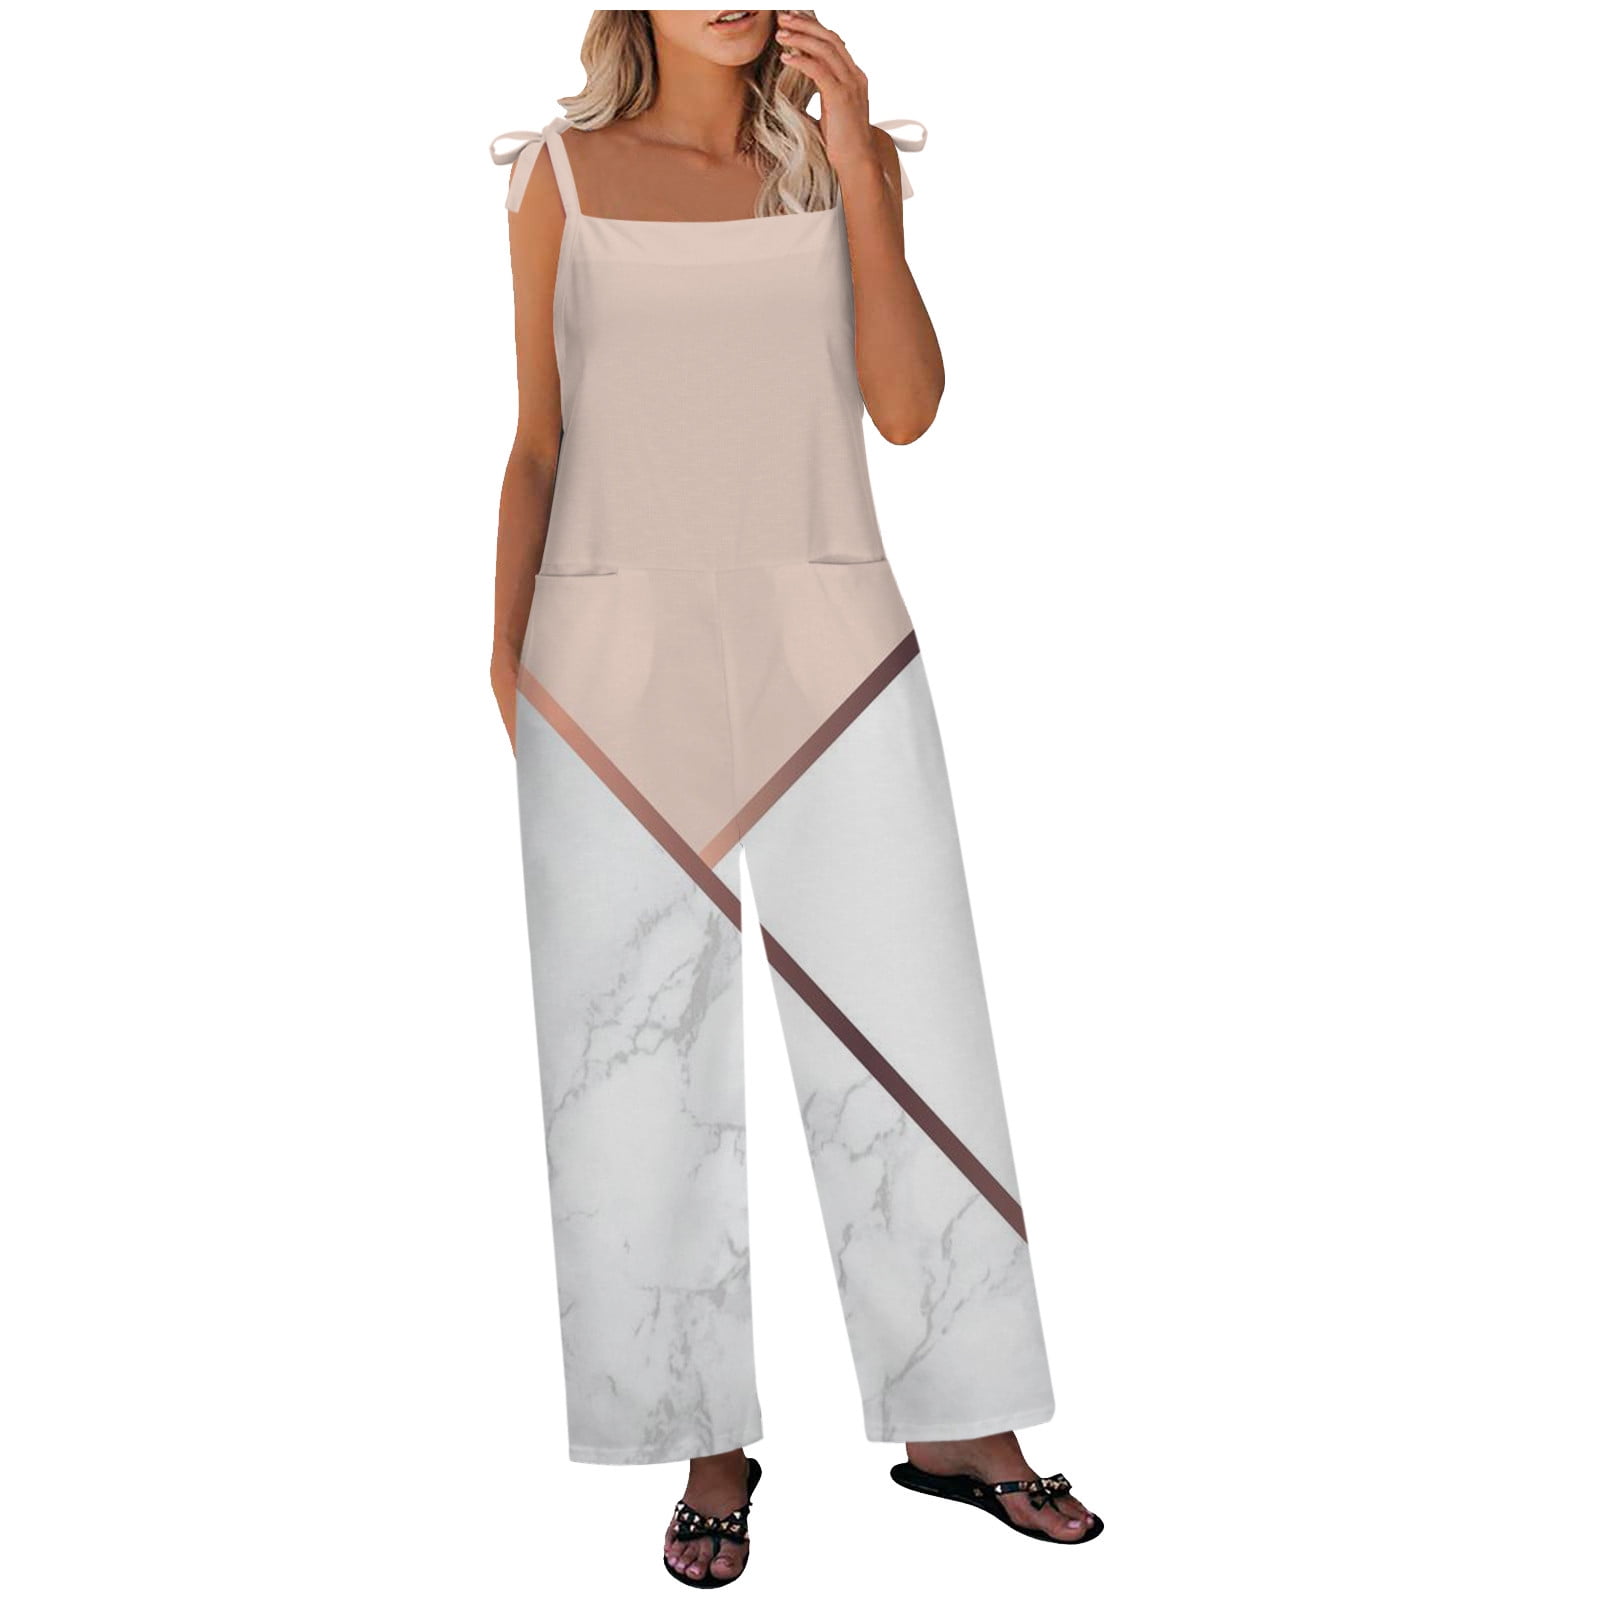 Jumpsuits for Women Dressy, Wide Leg Romper Loose Casual V Neck Spaghetti  Strap Stretchy Long Romper Jumpsuit with Pockets Flash Sales Today Deals  Prime Account Balance On My Account #2 